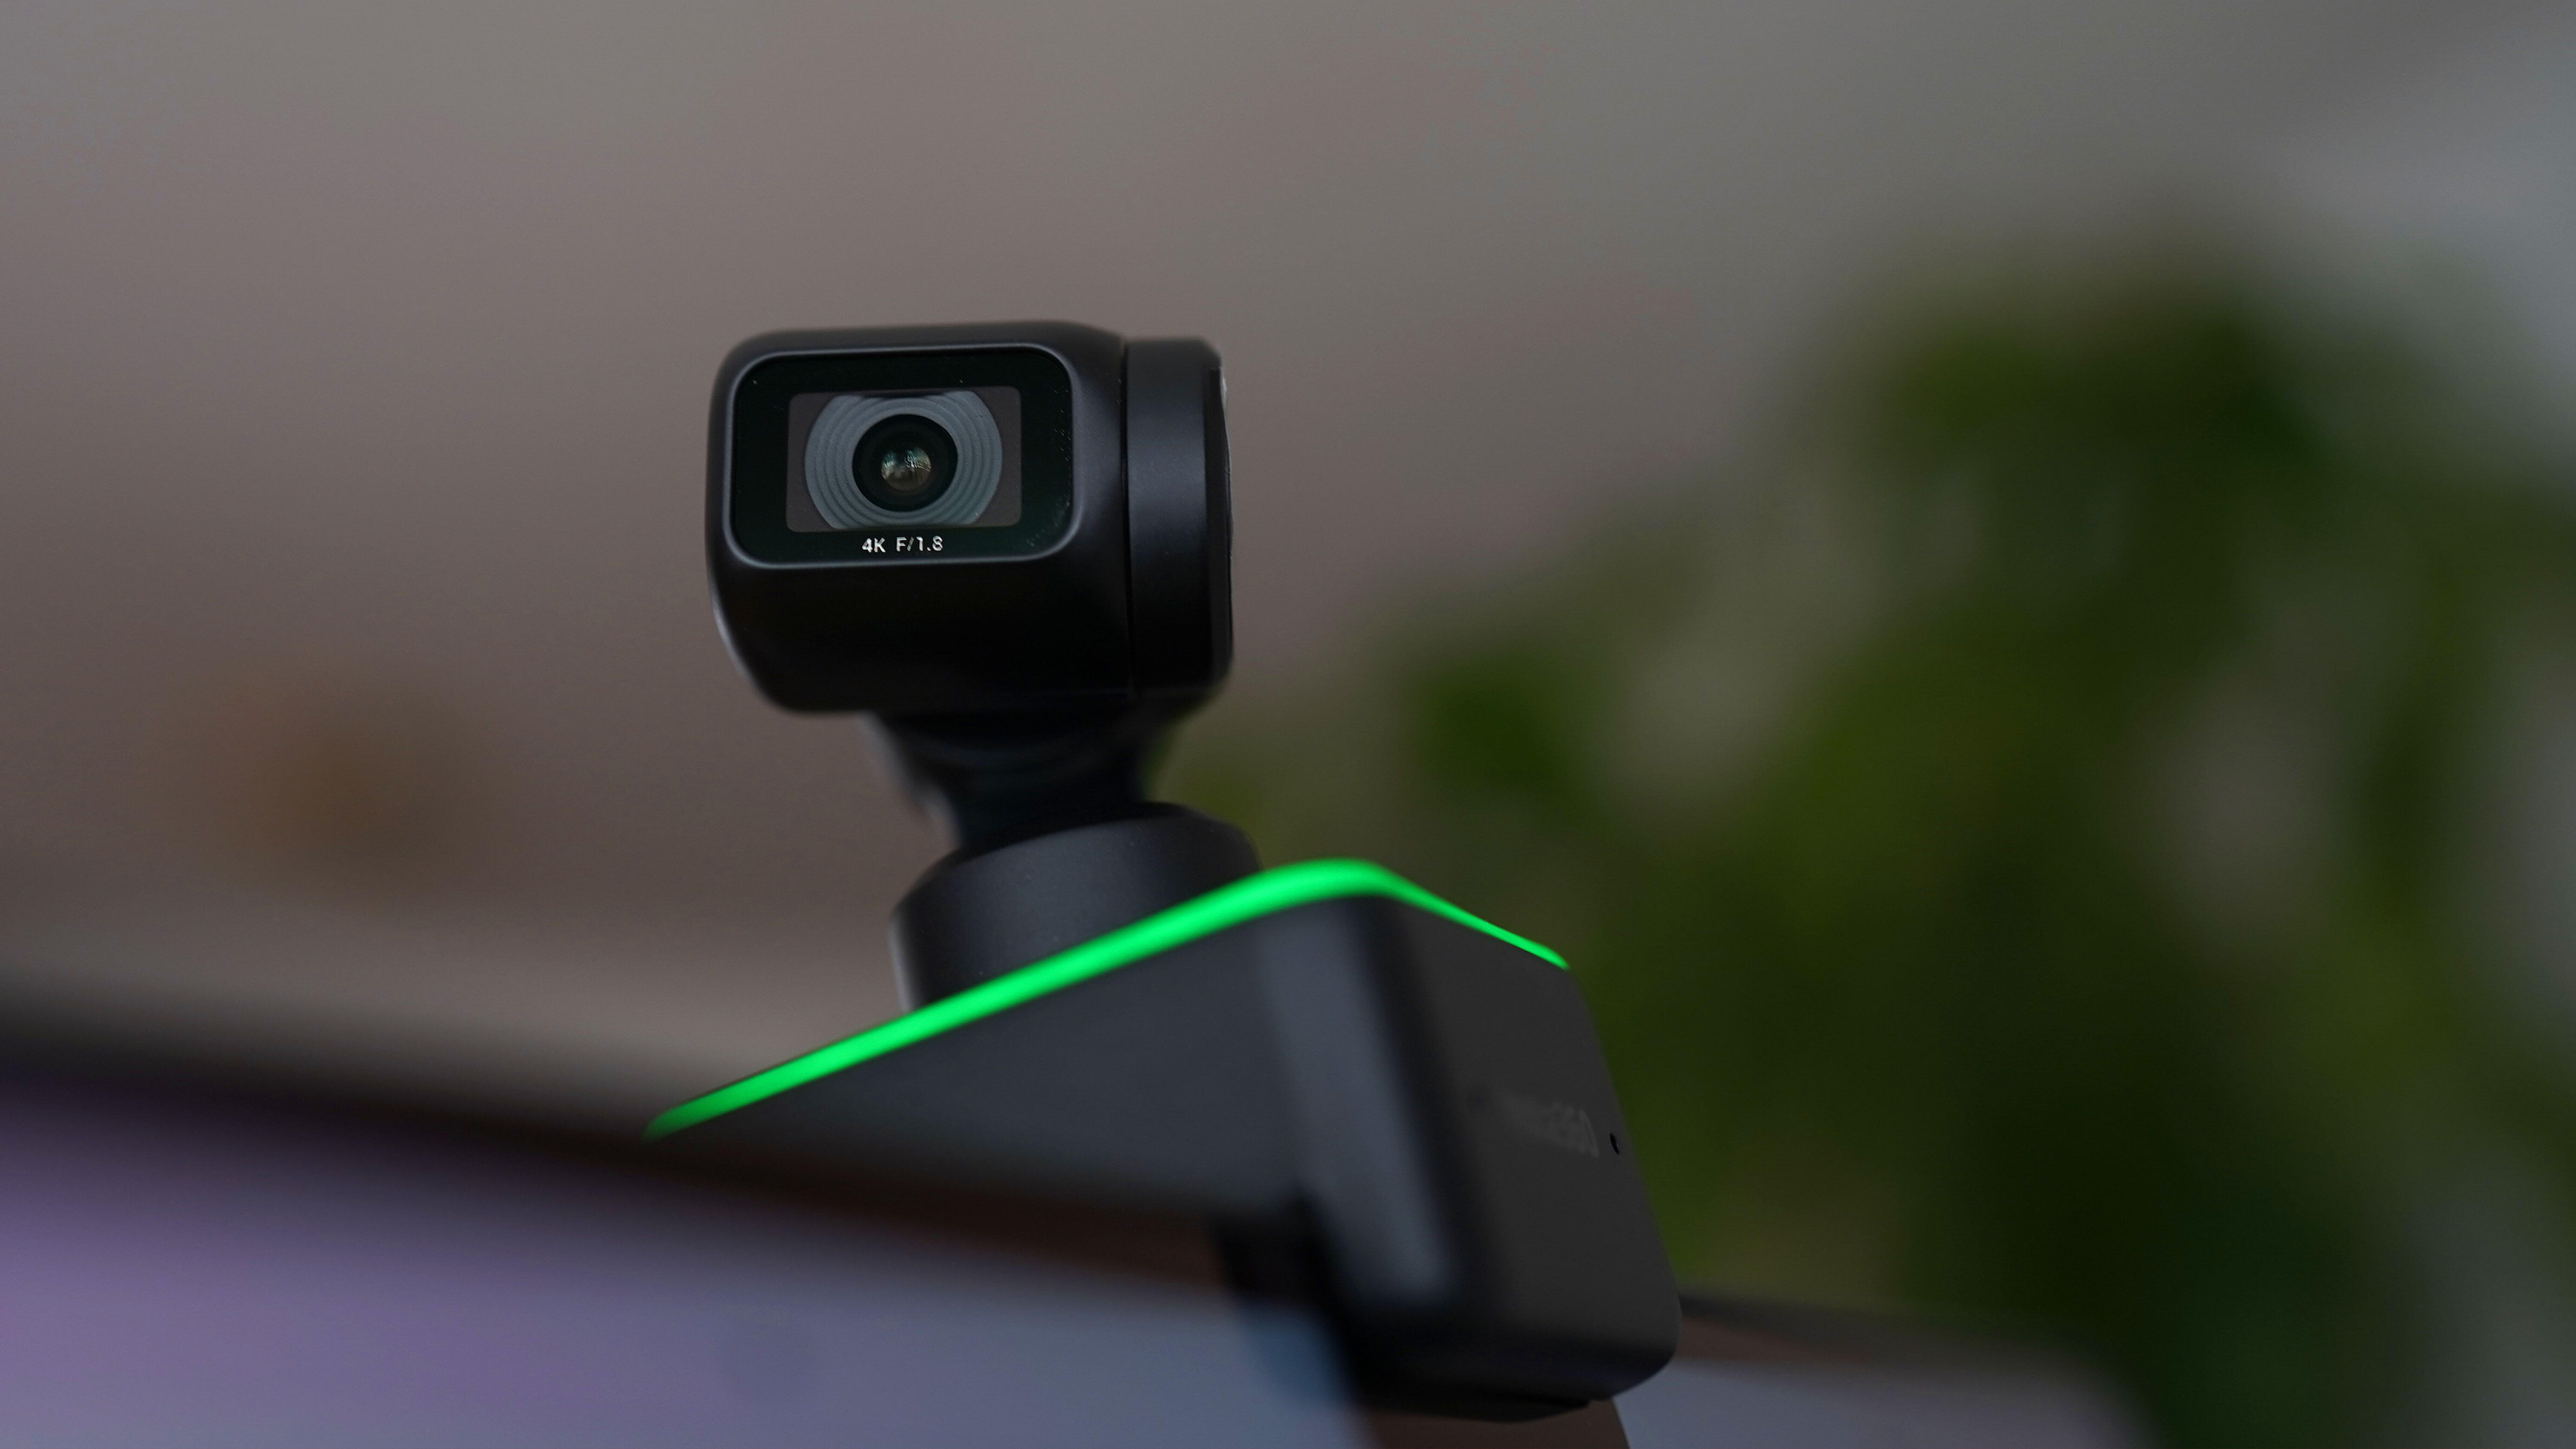 review: business Insta360 This | means webcam ZDNET new 4K Link